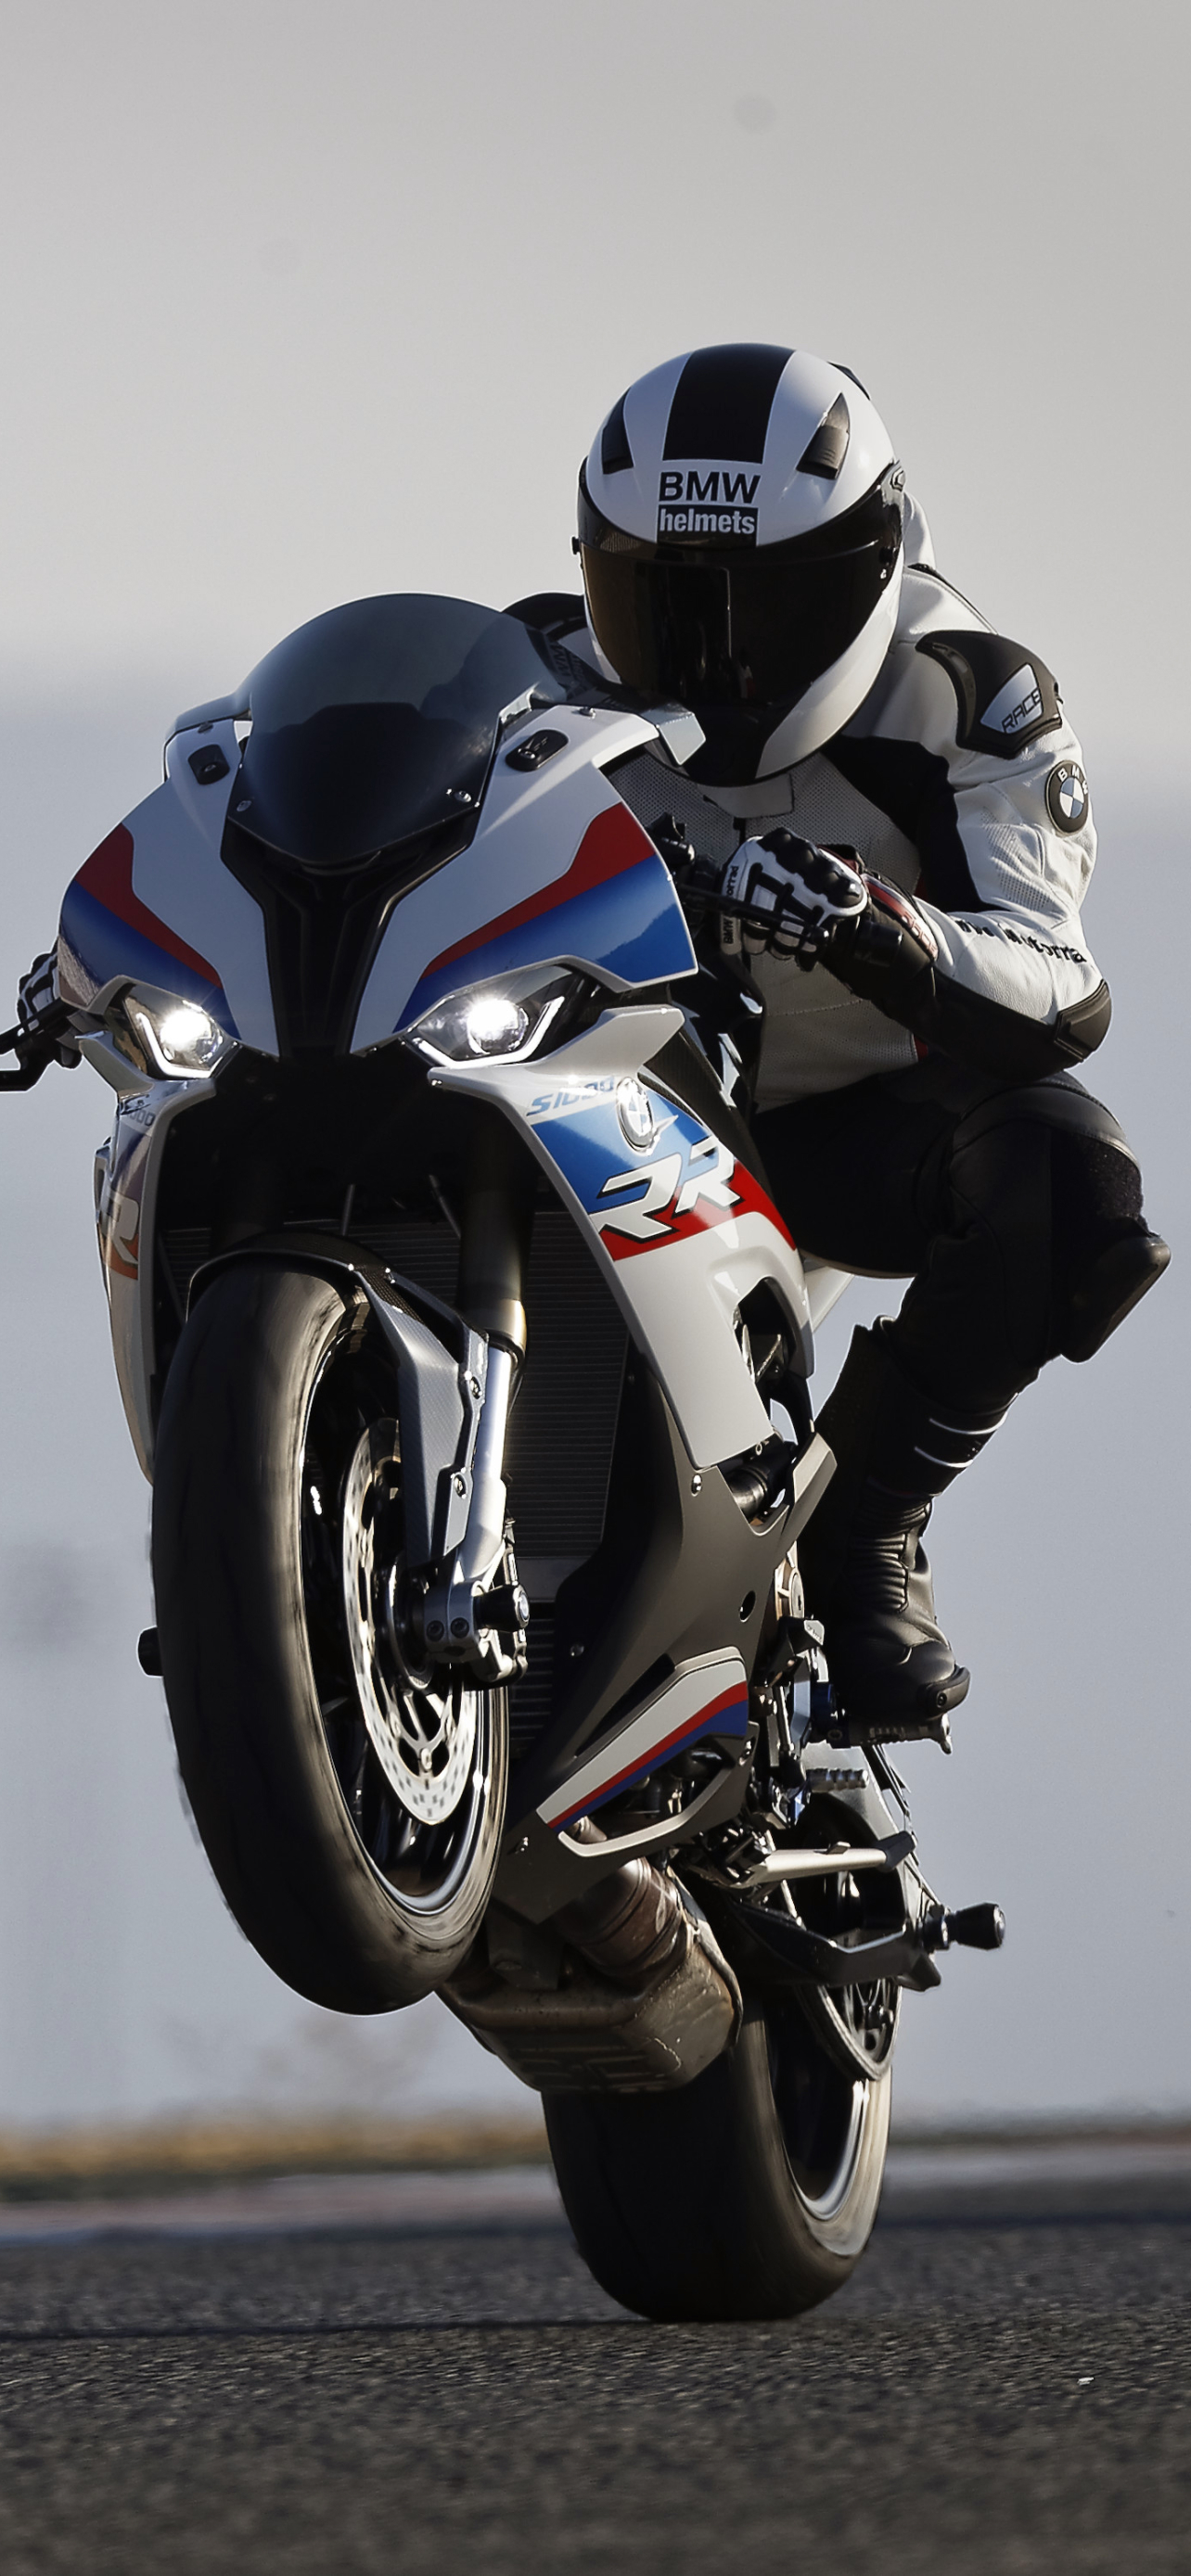 bmw s1000rr, bmw s1000, motorcycles, vehicles, motorcycle HD wallpaper